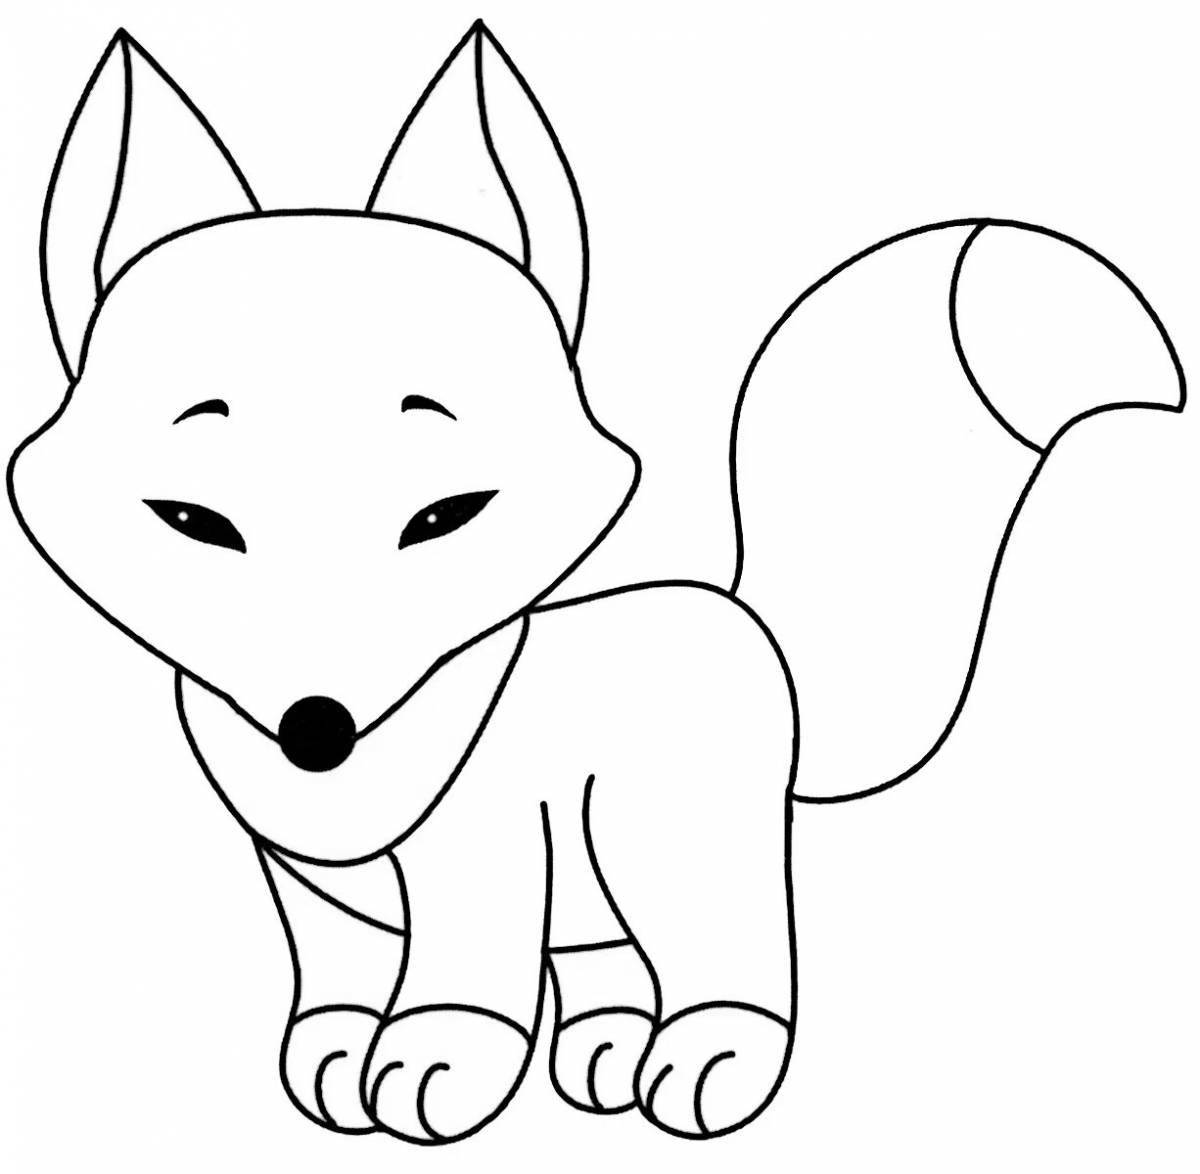 Sweet fox coloring book for children 3-4 years old